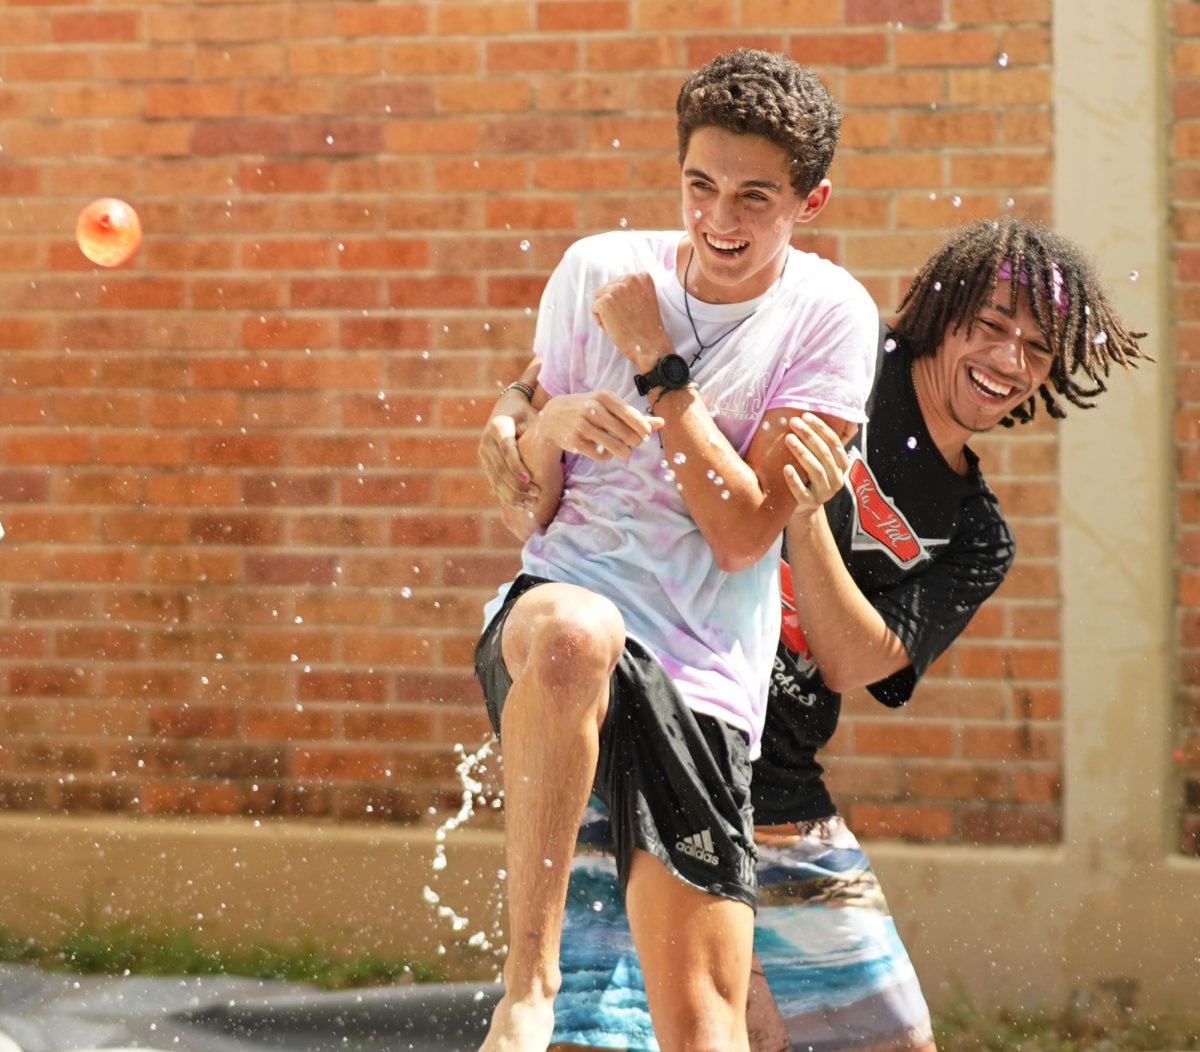 WATER BALLOONS AND SMILES: Senior Peer Assistance and Leadership program member Jude Masoni holds up his fellow PAL, senior David Herring, as a human shield to protect himself from the path of an incoming water balloon. Students paid  to throw a balloon at the PALS on Tuesday as part of the shooting PAL-ery, one of the Pink Week fundraisers intended to raise money for the Breast Cancer Resource Center of Central Texas, an Austin-based non-profit that provides personalized support to those affected by breast cancer.  Year after year the PALS put on Pink Week in order to raise funds and awareness for the fight against breast cancer. The PALS put on a variety of different events the whole week at lunch in hopes of both bringing in profits and bringing an exciting week of fun to the McCallum community.   

Herring was made a target of the water balloon by his cross country teammates.

“I enjoyed seeing my teammates coming out to donate as I was telling them about it the week prior,” Herring said. “I was also just having fun on that nice day with my fellow PALS. Some of them that did the pallery that day, like Jude, I’ve known since elementary school.”

Caption by Chloe Lewcock with reporting by JoJo Barnard.  